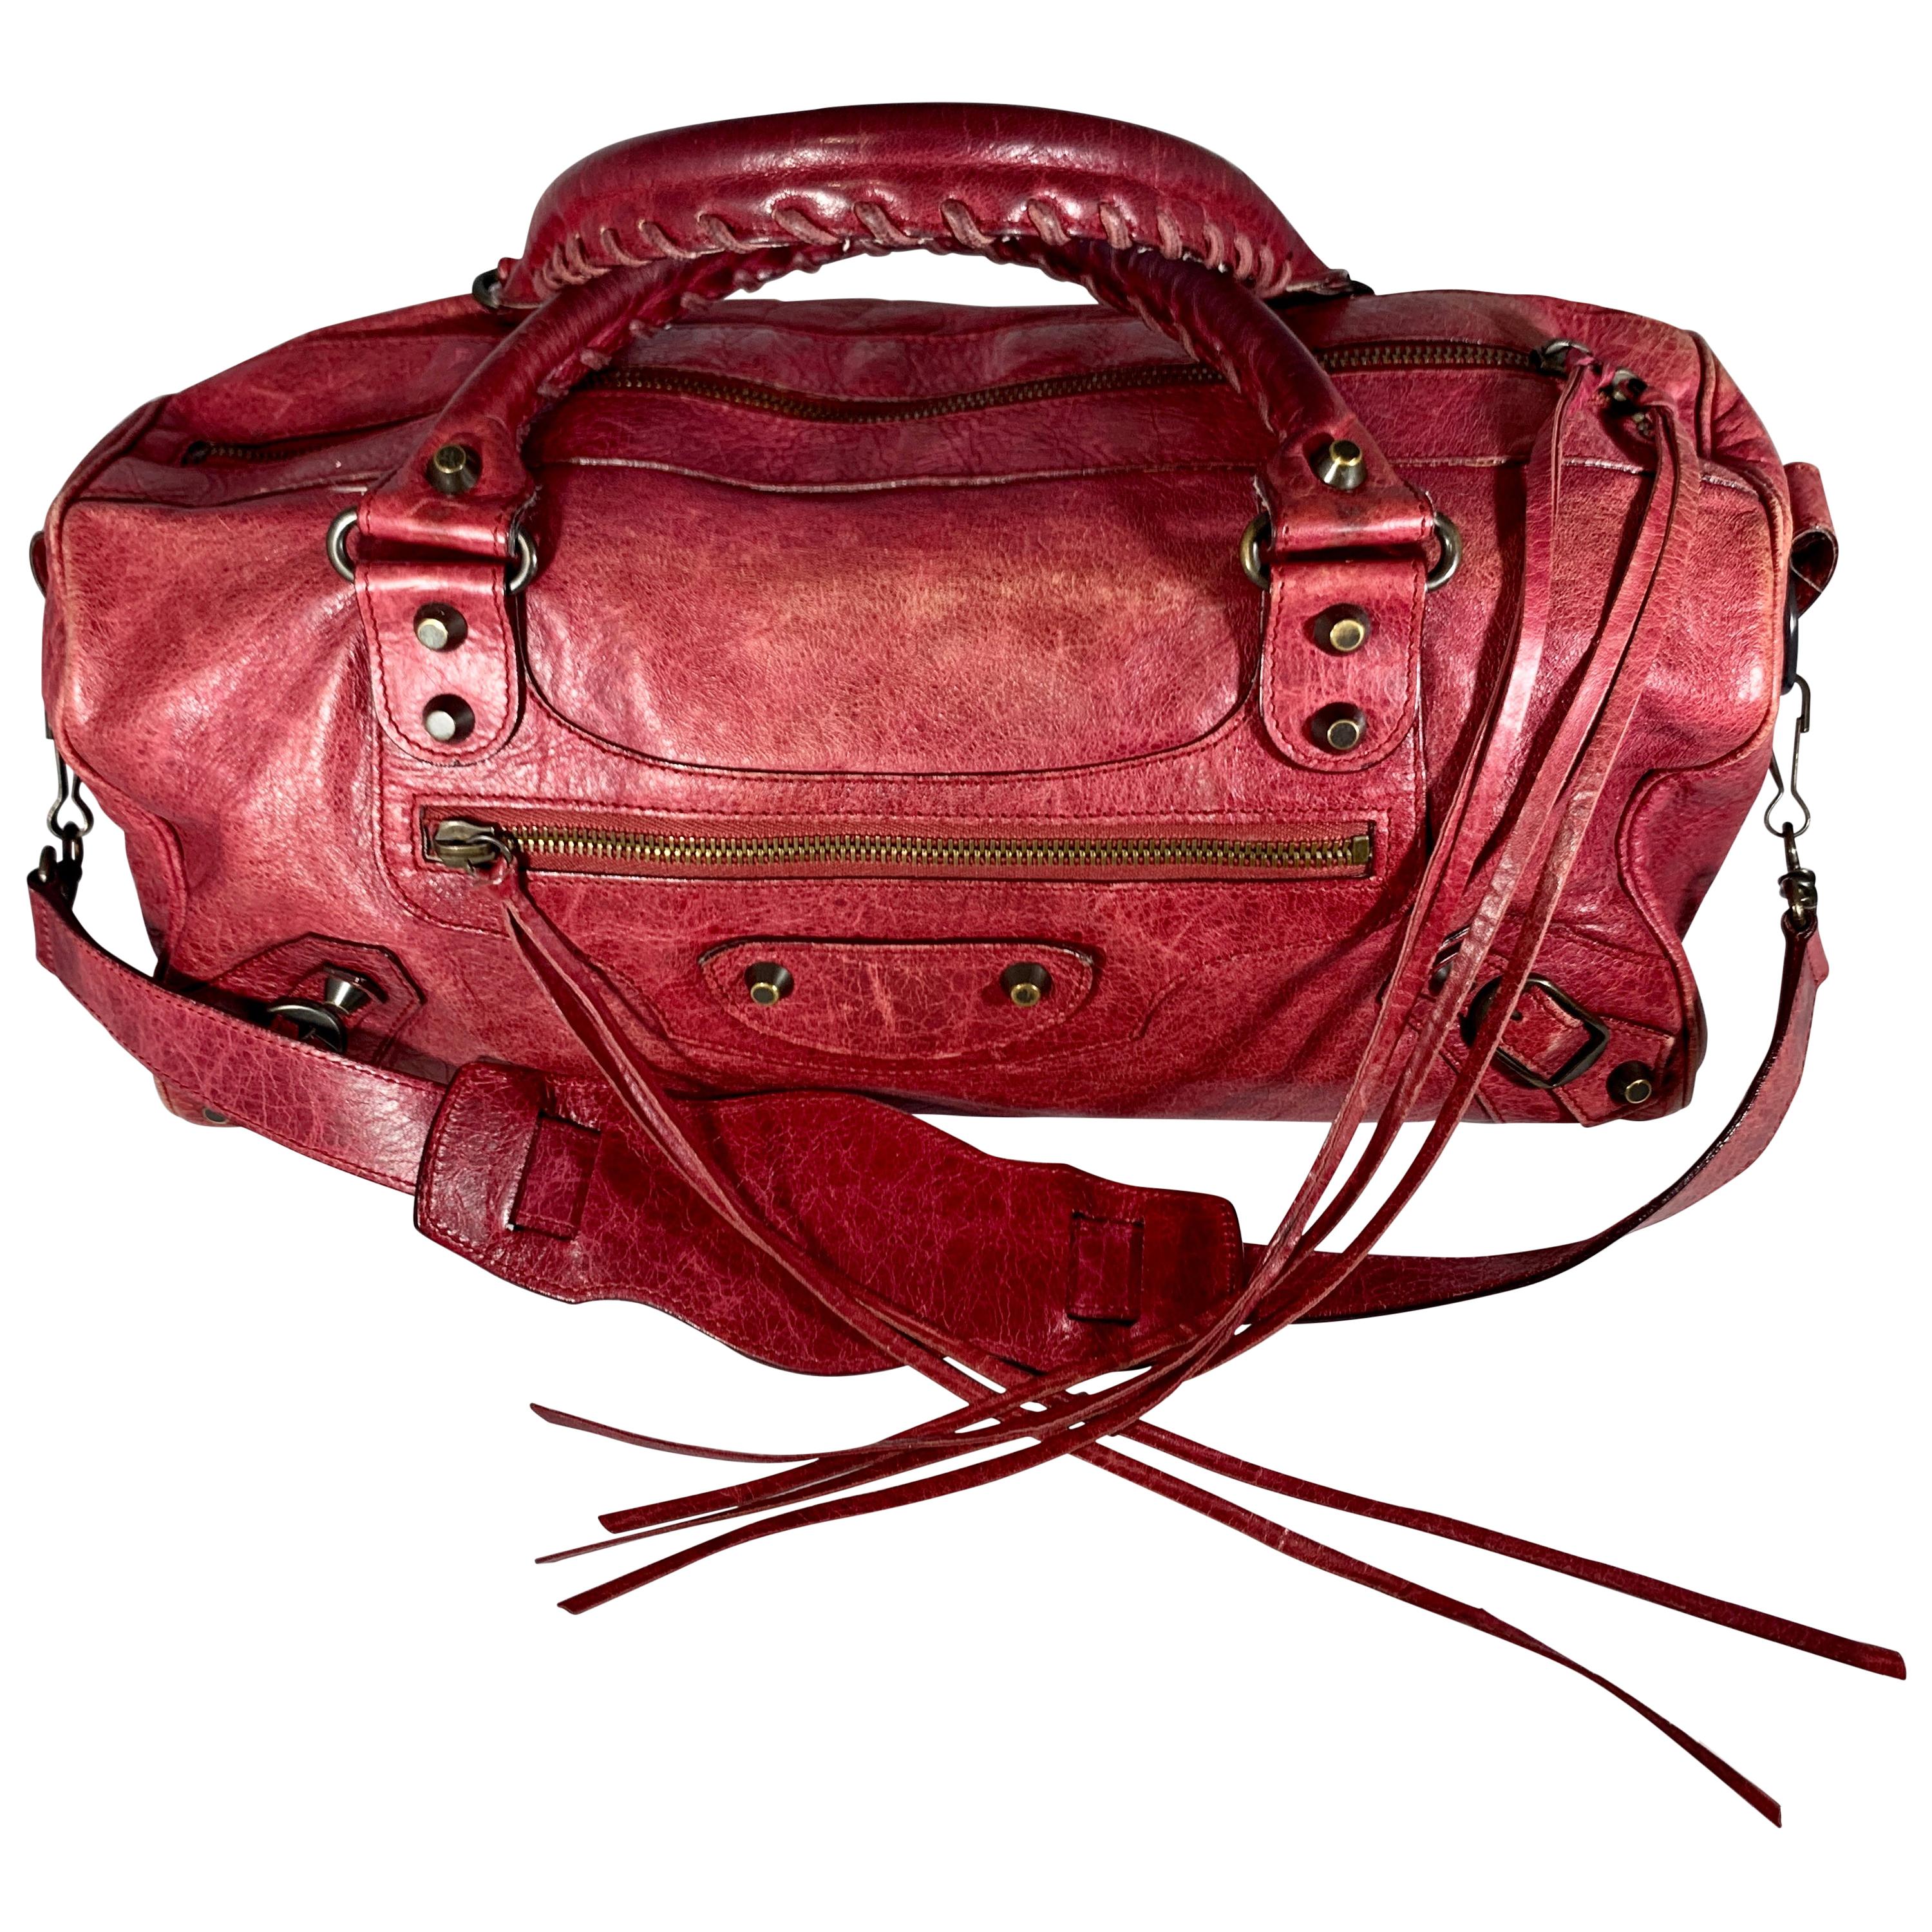 Balenciaga Hand Bag The Twiggy Reds Leather, Made in Italy, Shoulder Bag